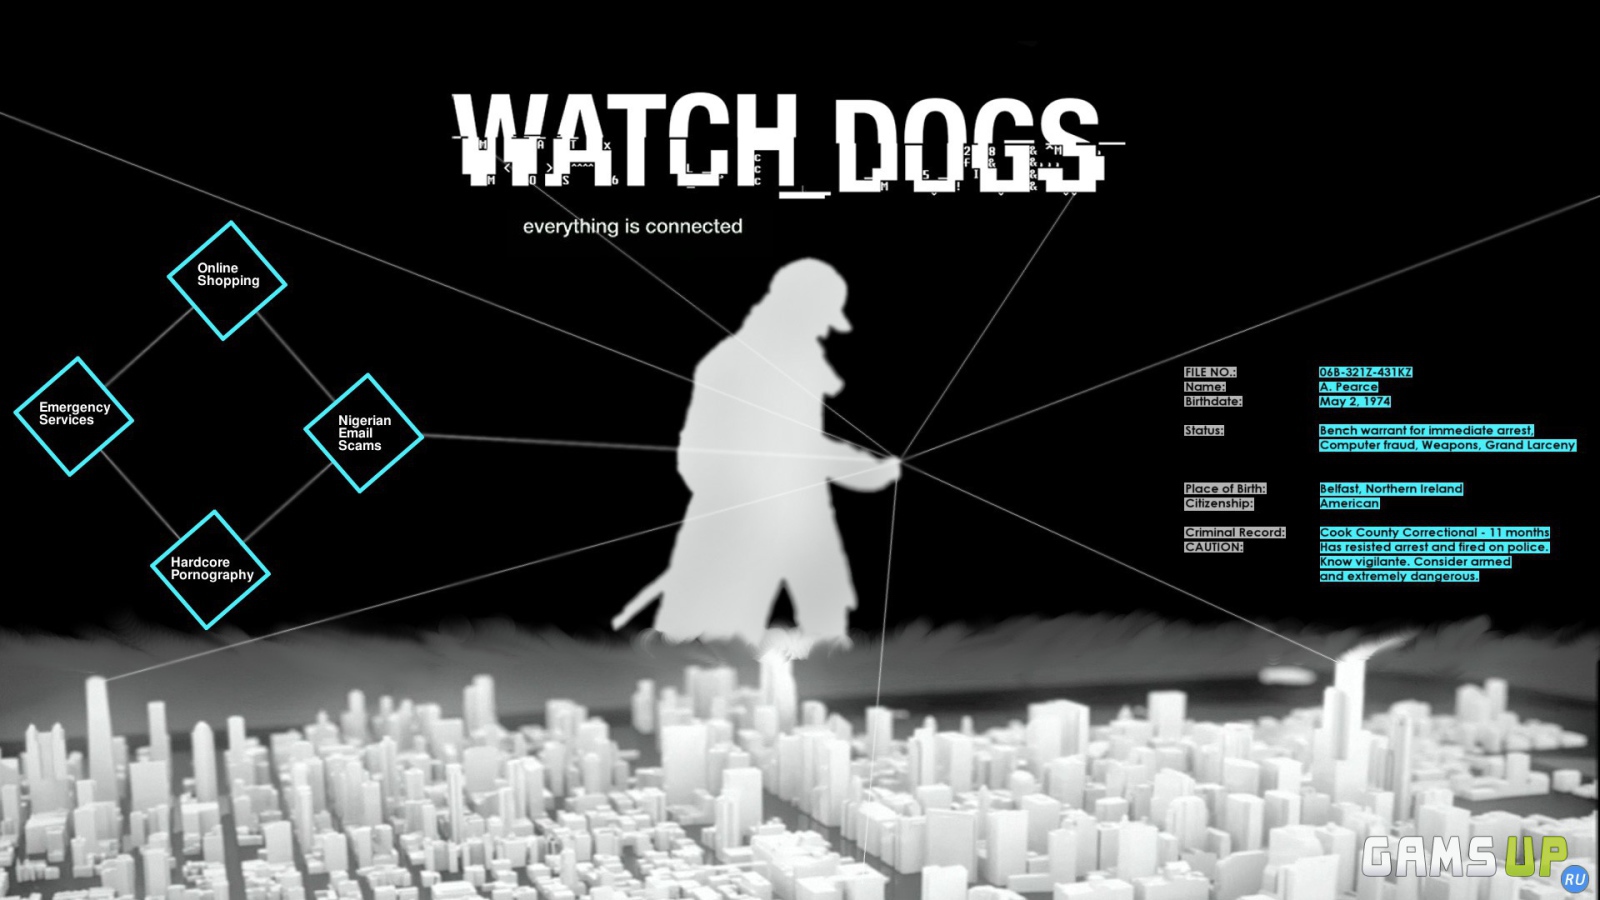 Watch Dogs: the power of connection